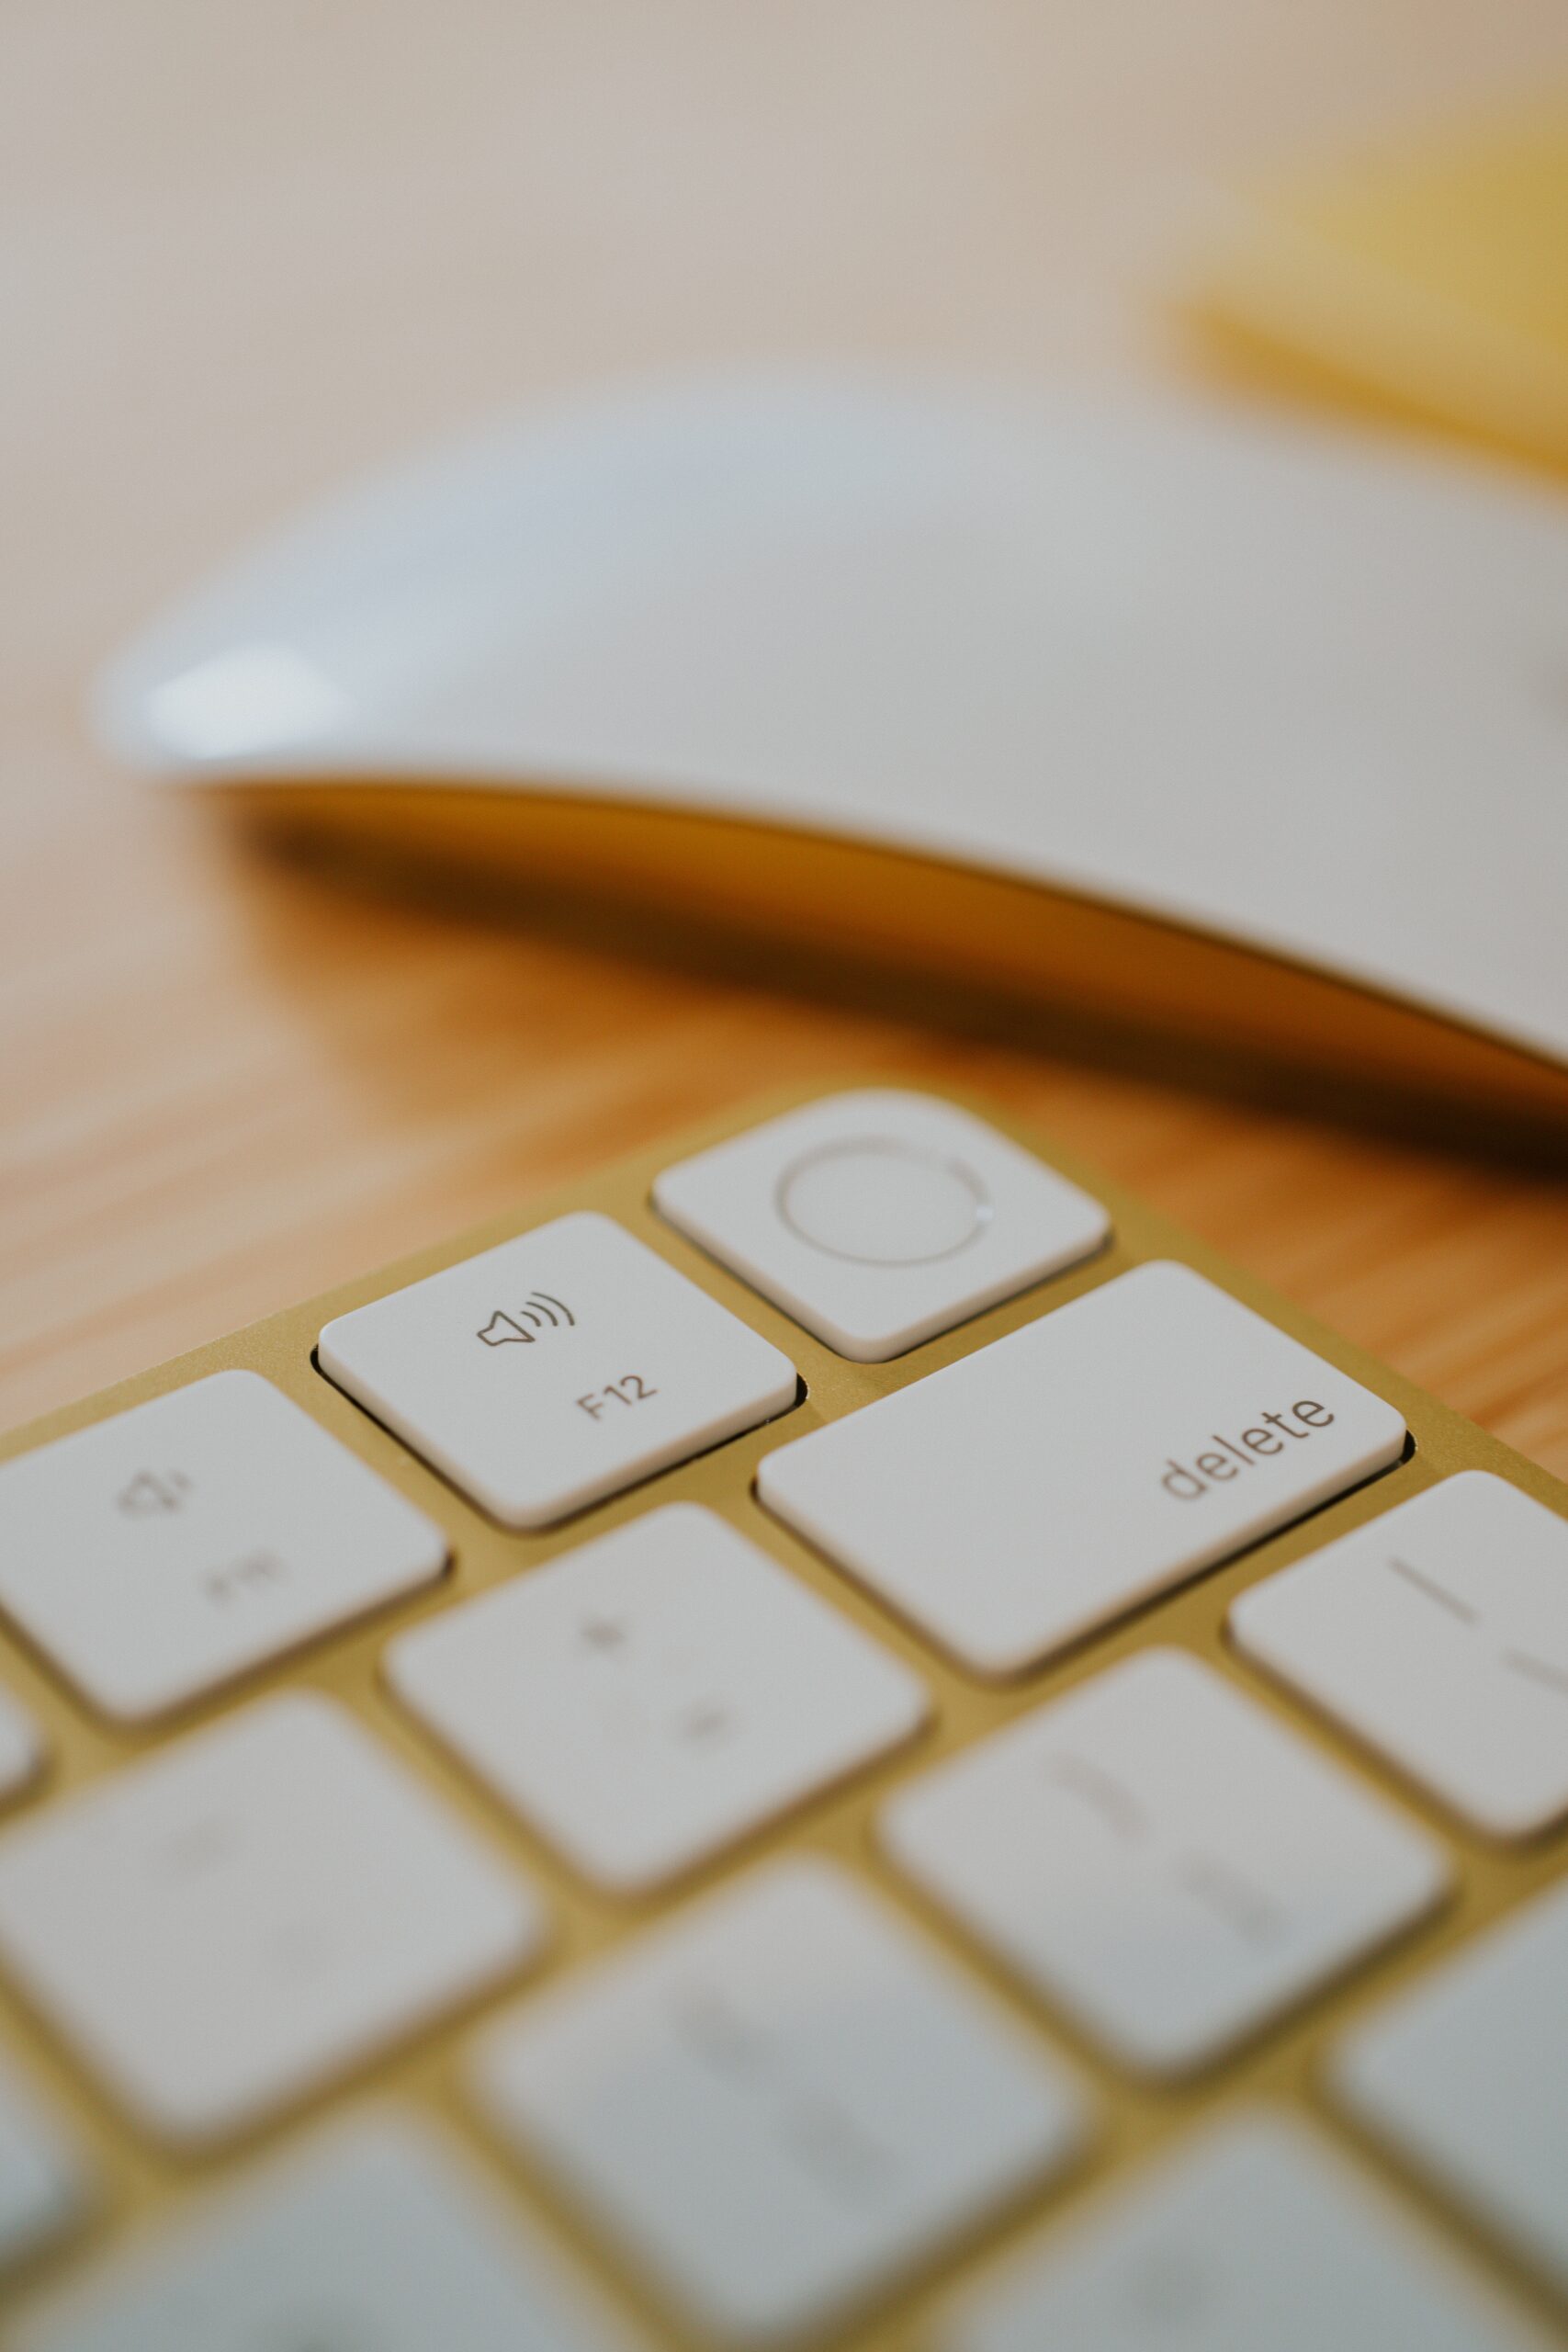 Yellow Apple keyboard with Touch ID fingerprint scanner with yellow Magic Mouse on a desk in a home office.